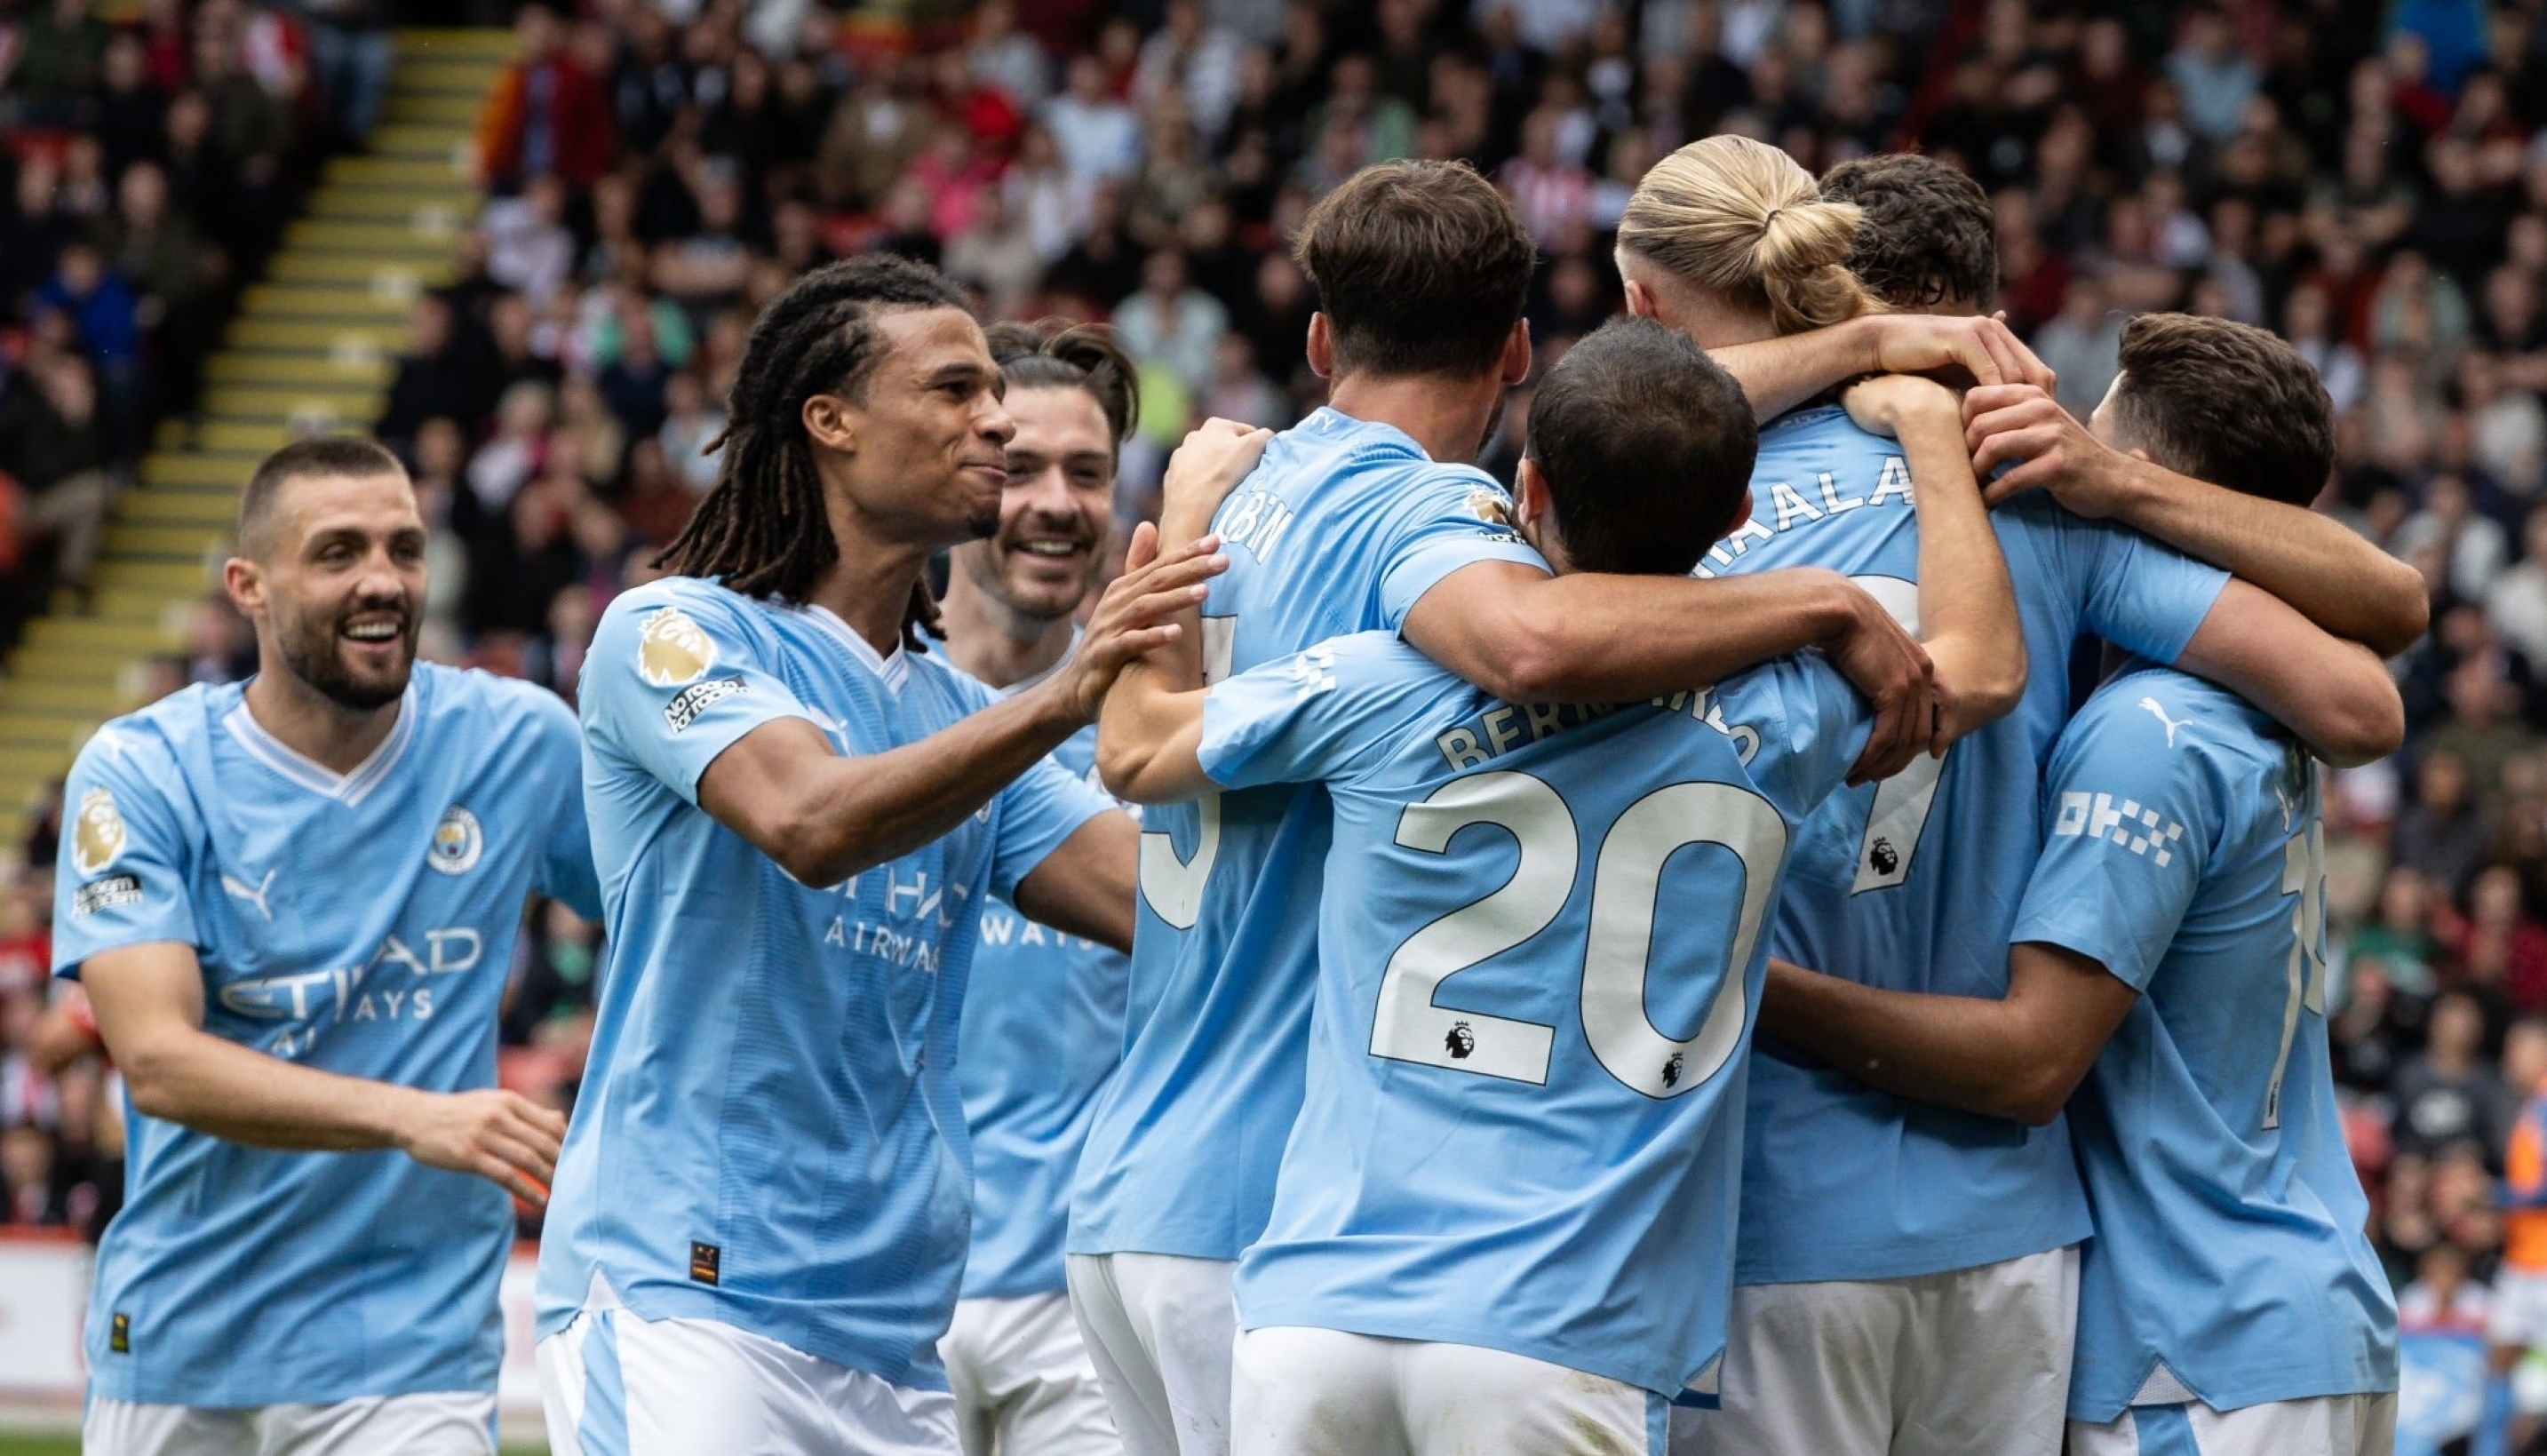 Man City vs Fulham - MCI vs FUL - Manchester City are looking to keep up their winning streak as they approach their 4th Premier League match